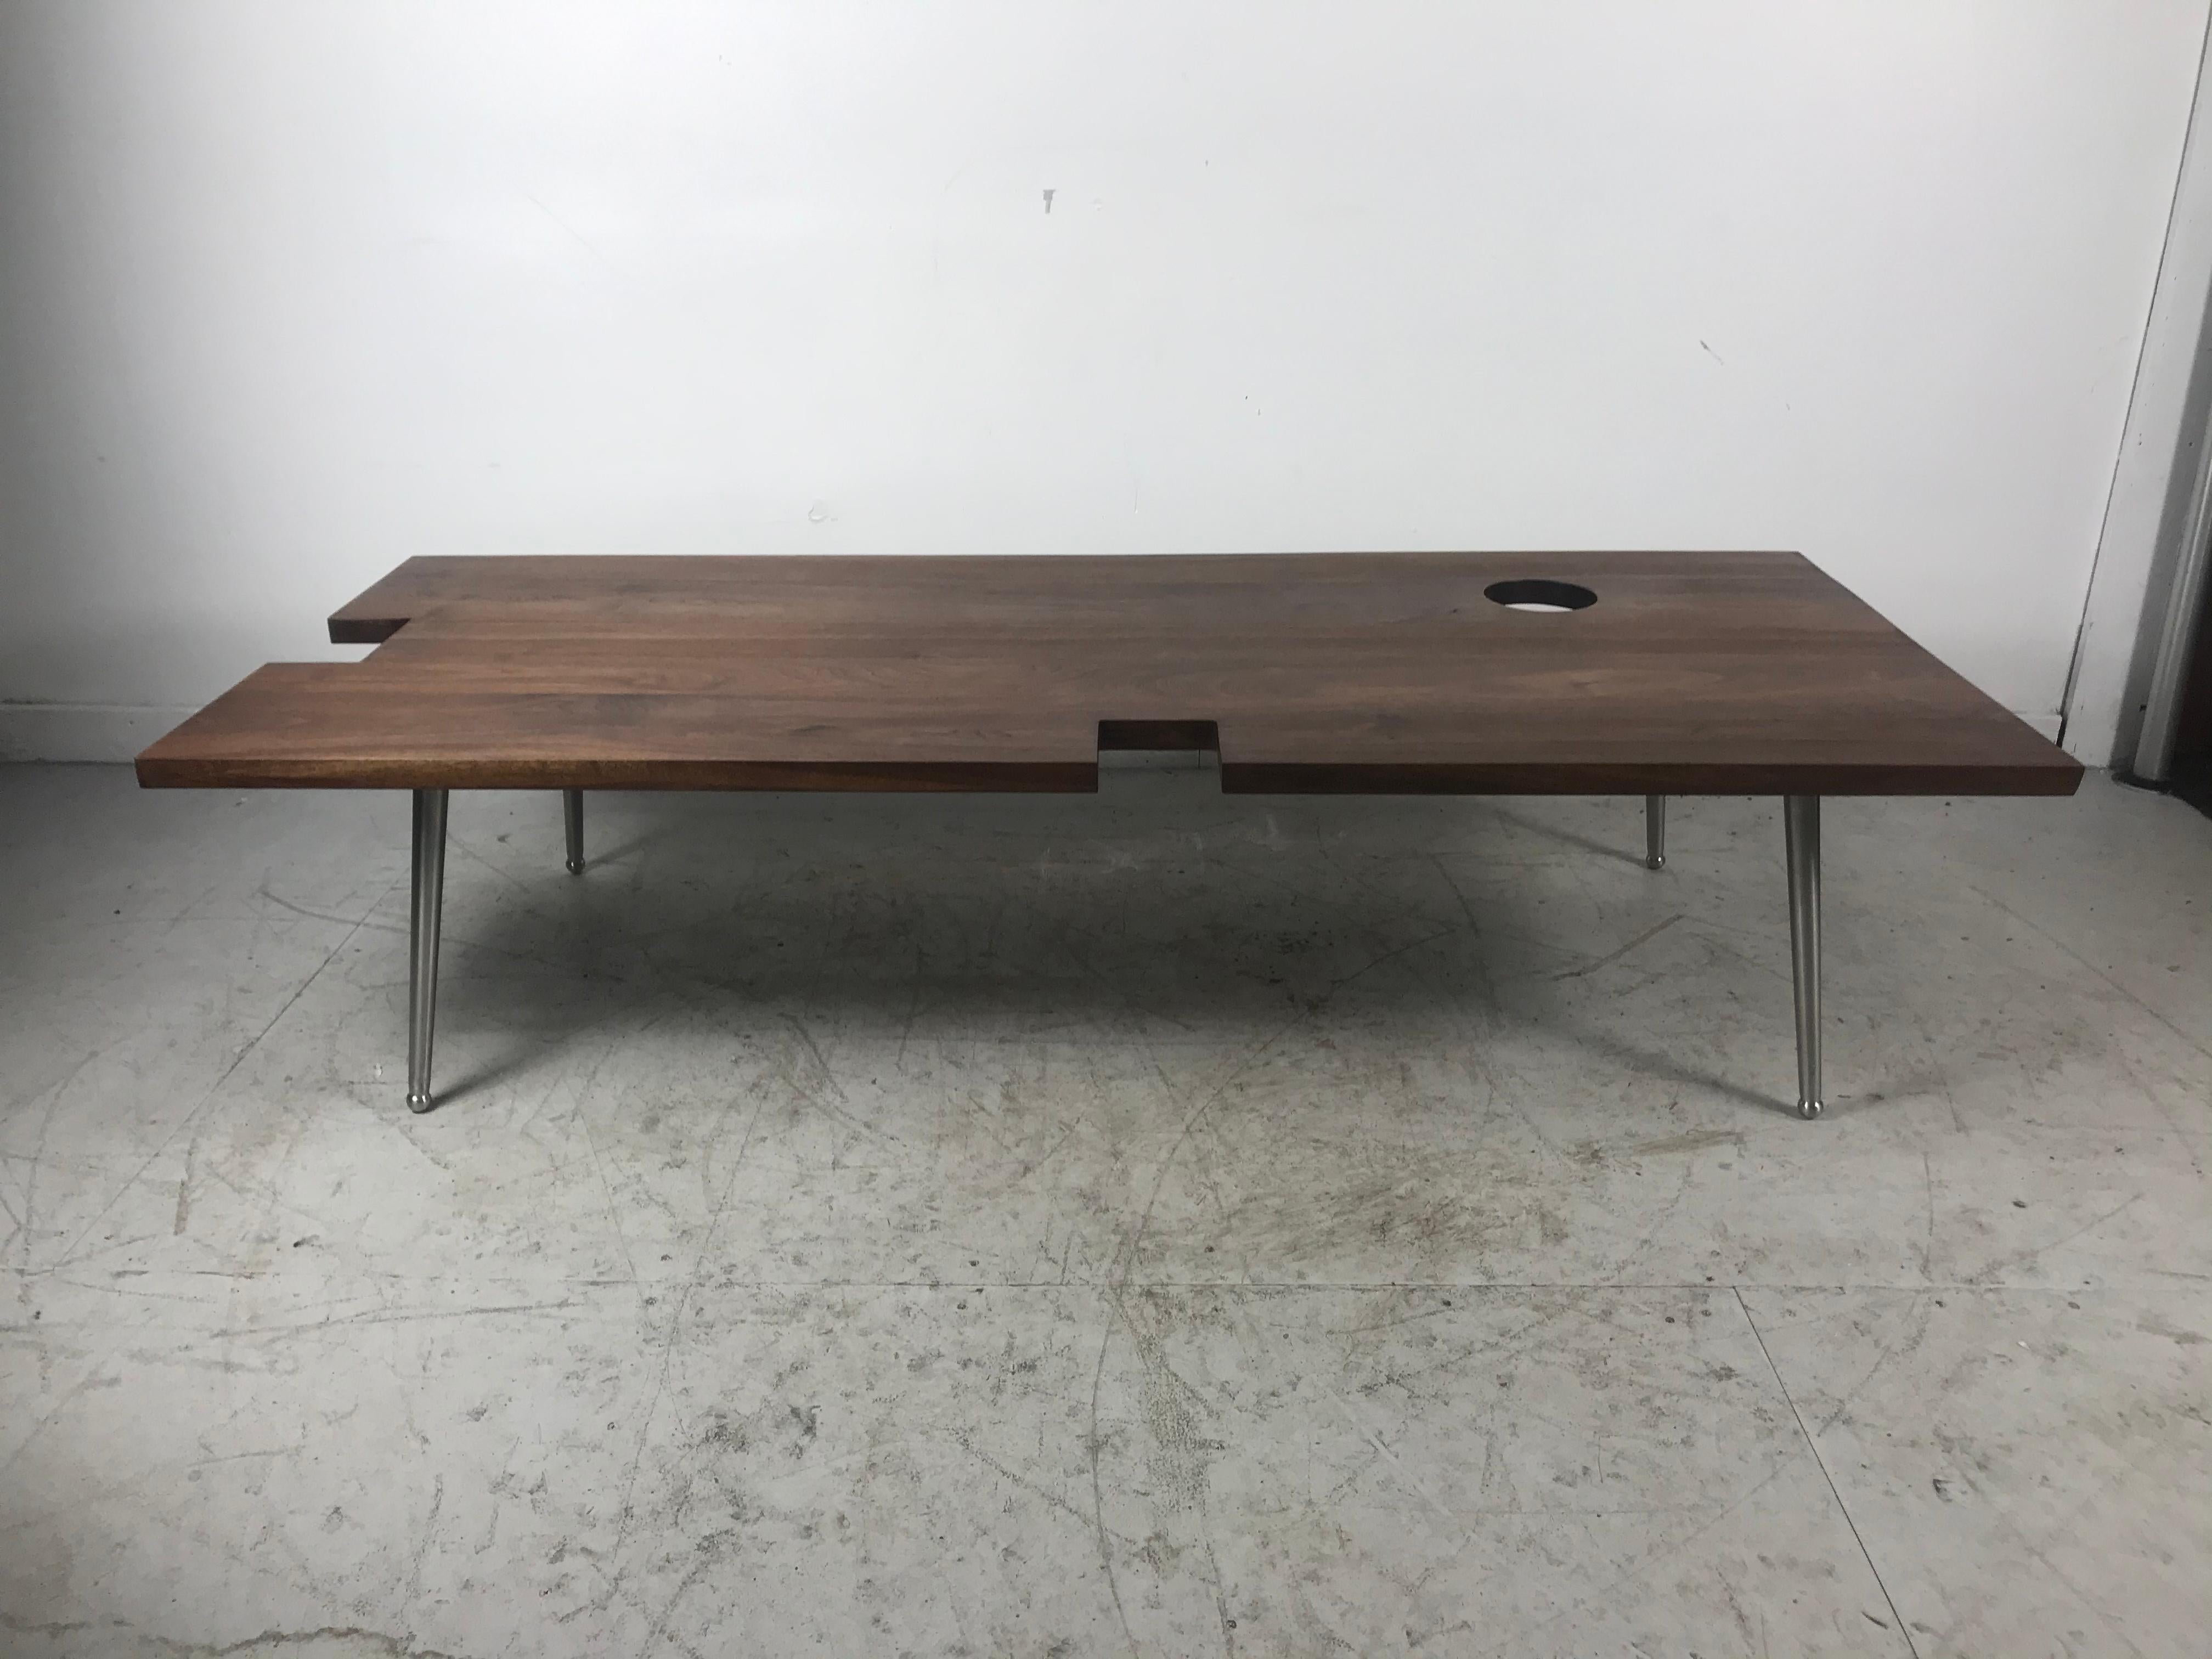 Modernist bespoke solid walnut and steel coffee /cocktail table designed and bench made by John Tracey, Rochester NY artist, amazing architectural Bauhaus design, would fit seamlessly into any modern, contemporary environment, hand delivery avail to